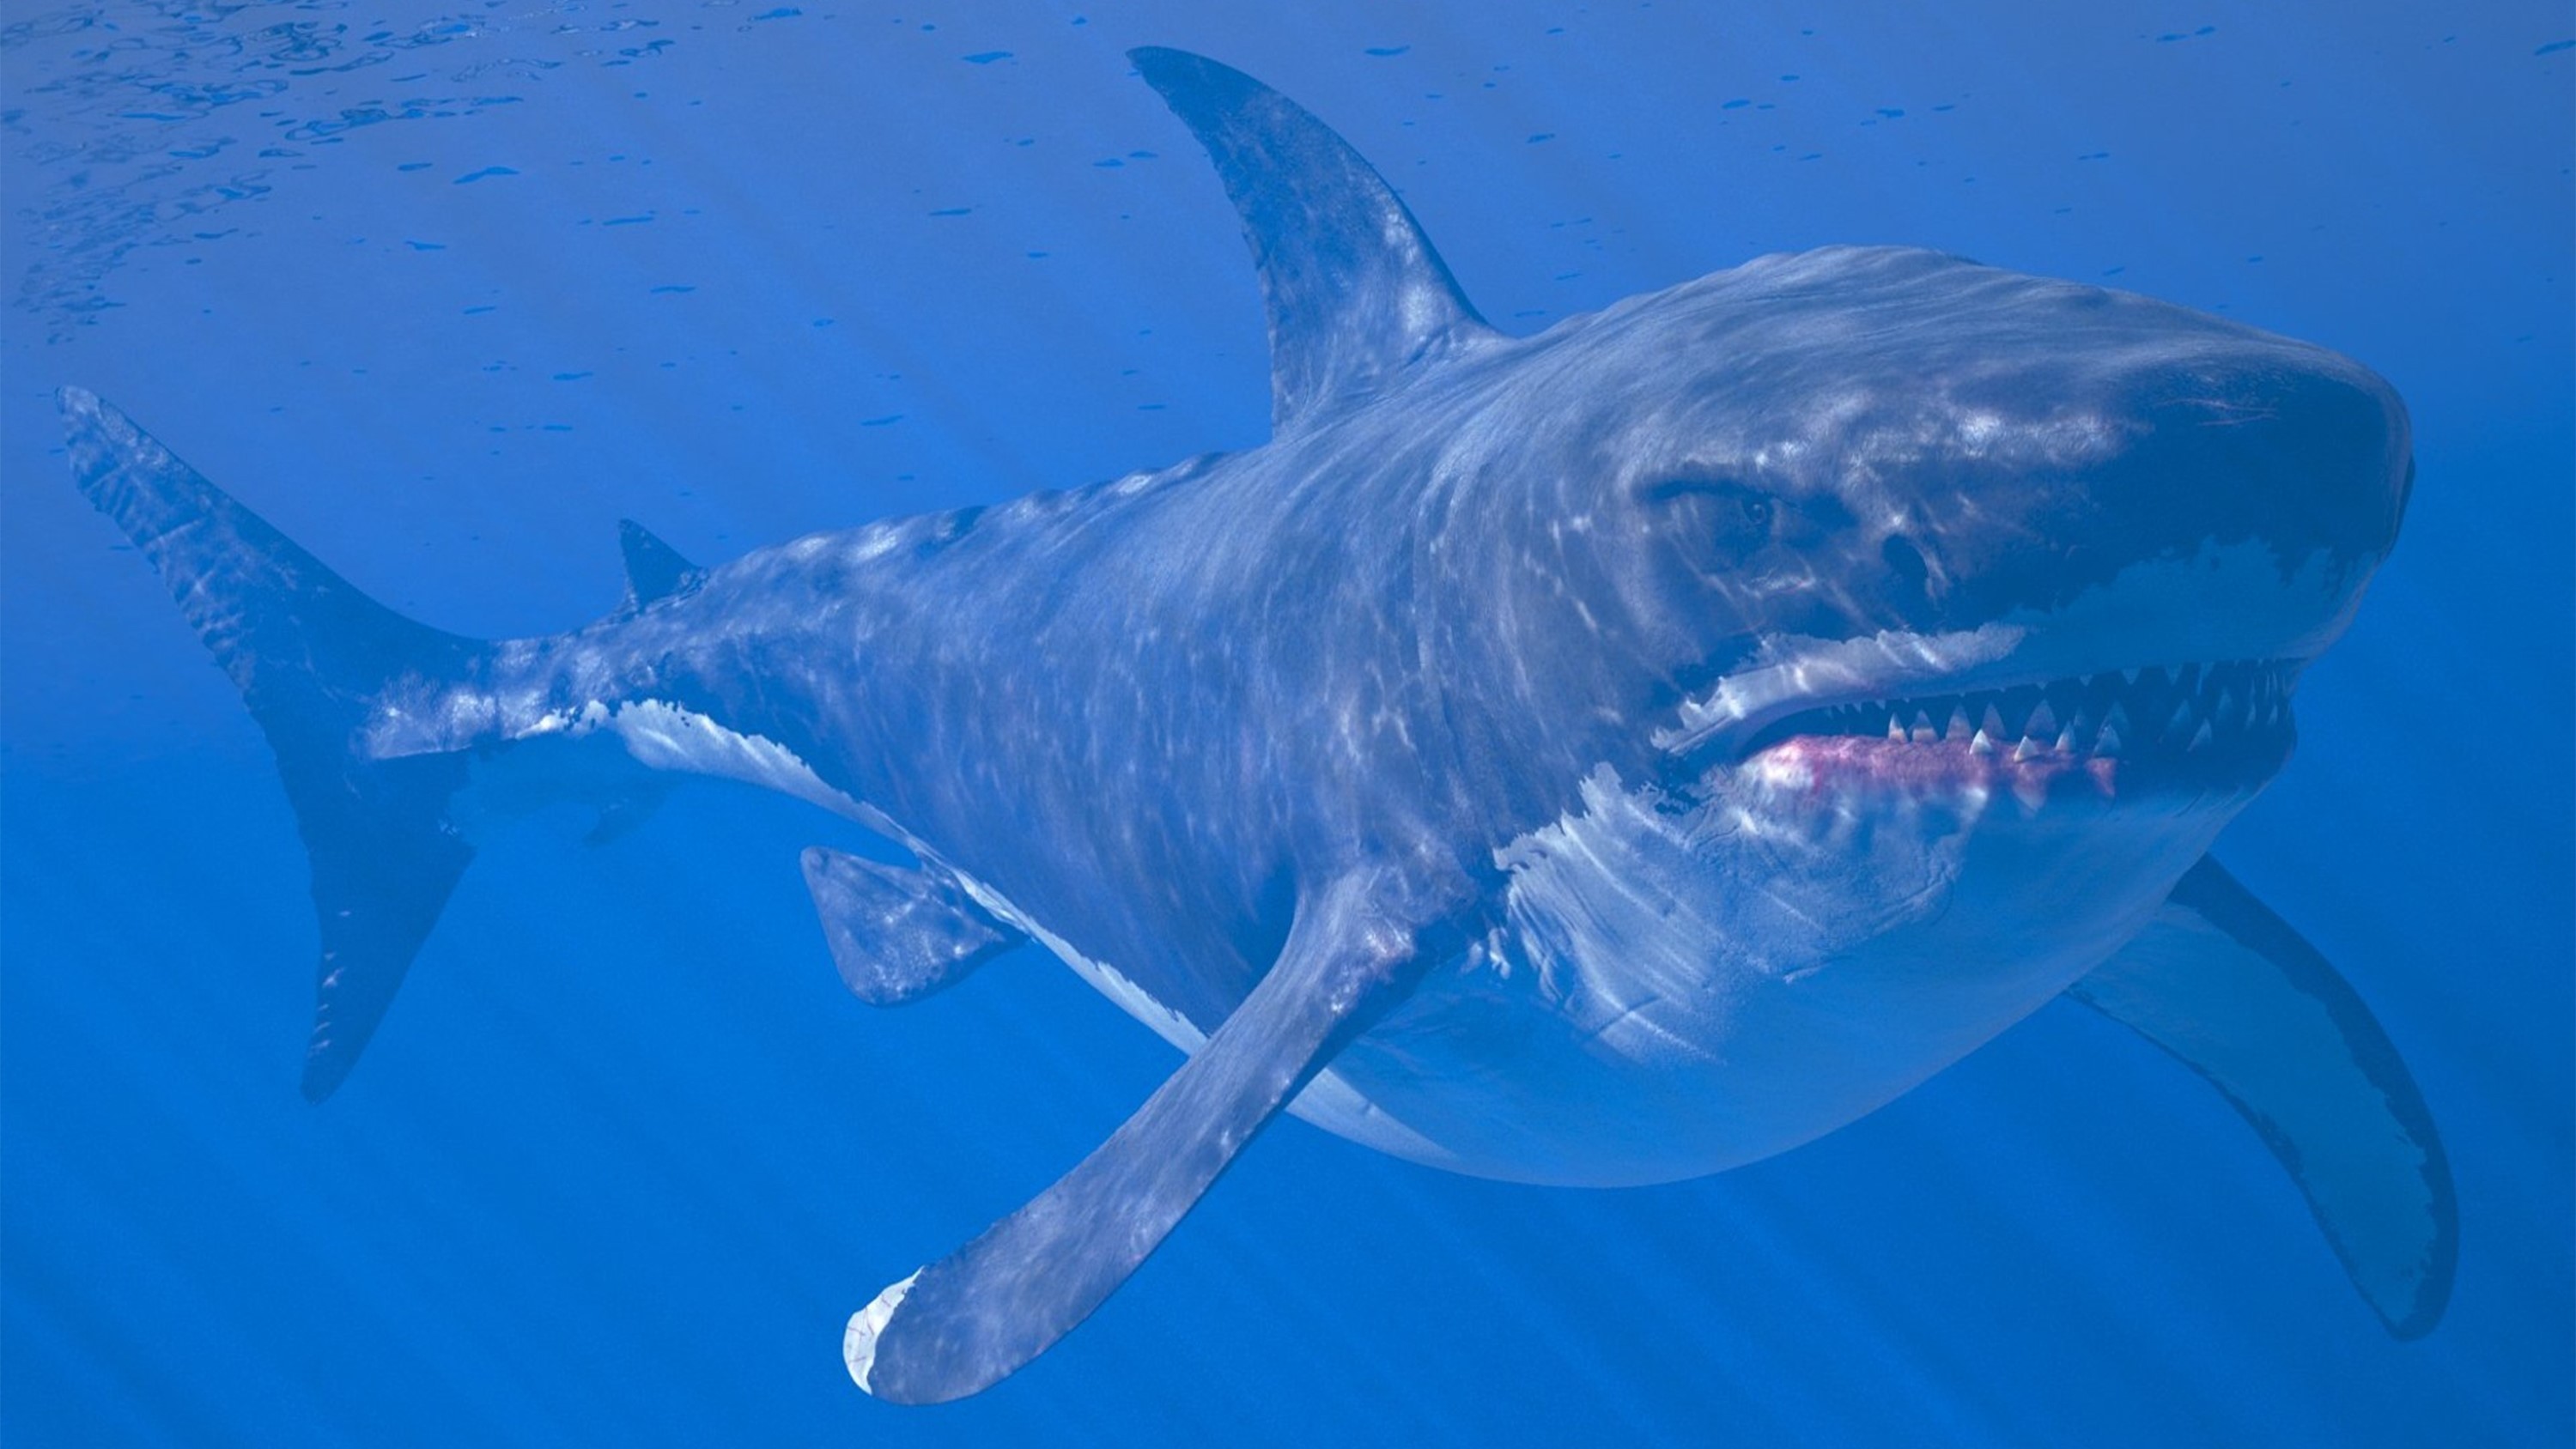 Megalodon didn't look like a 50-foot great white shark